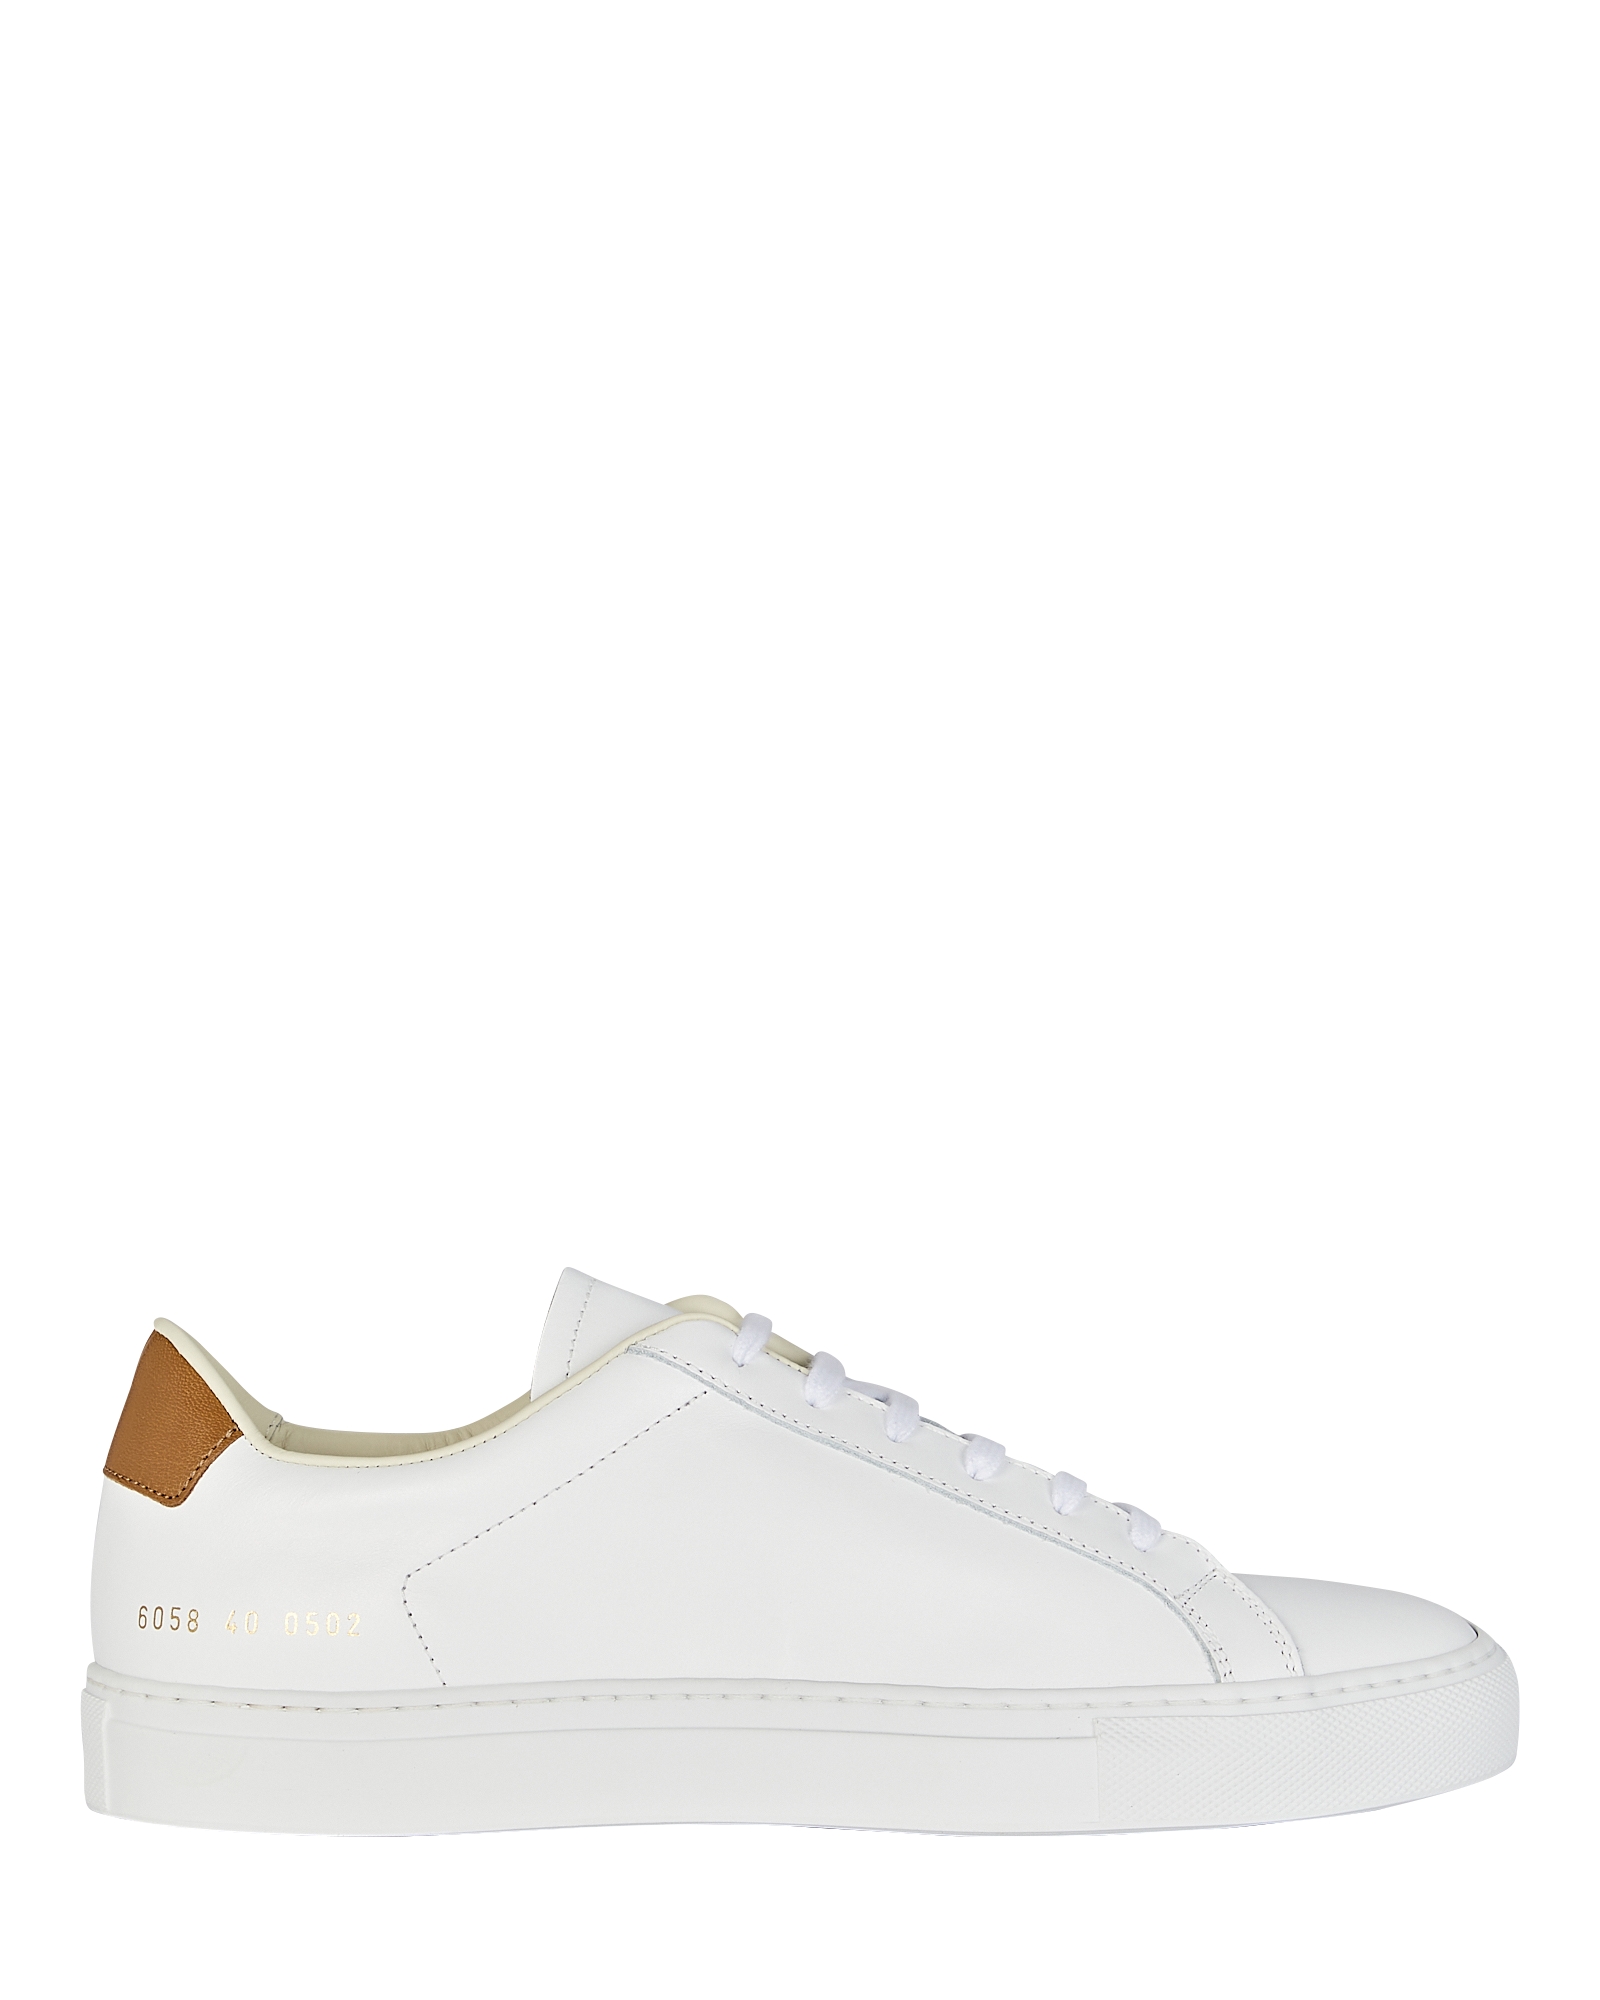 Common Projects Retro Leather Sneakers | INTERMIX®